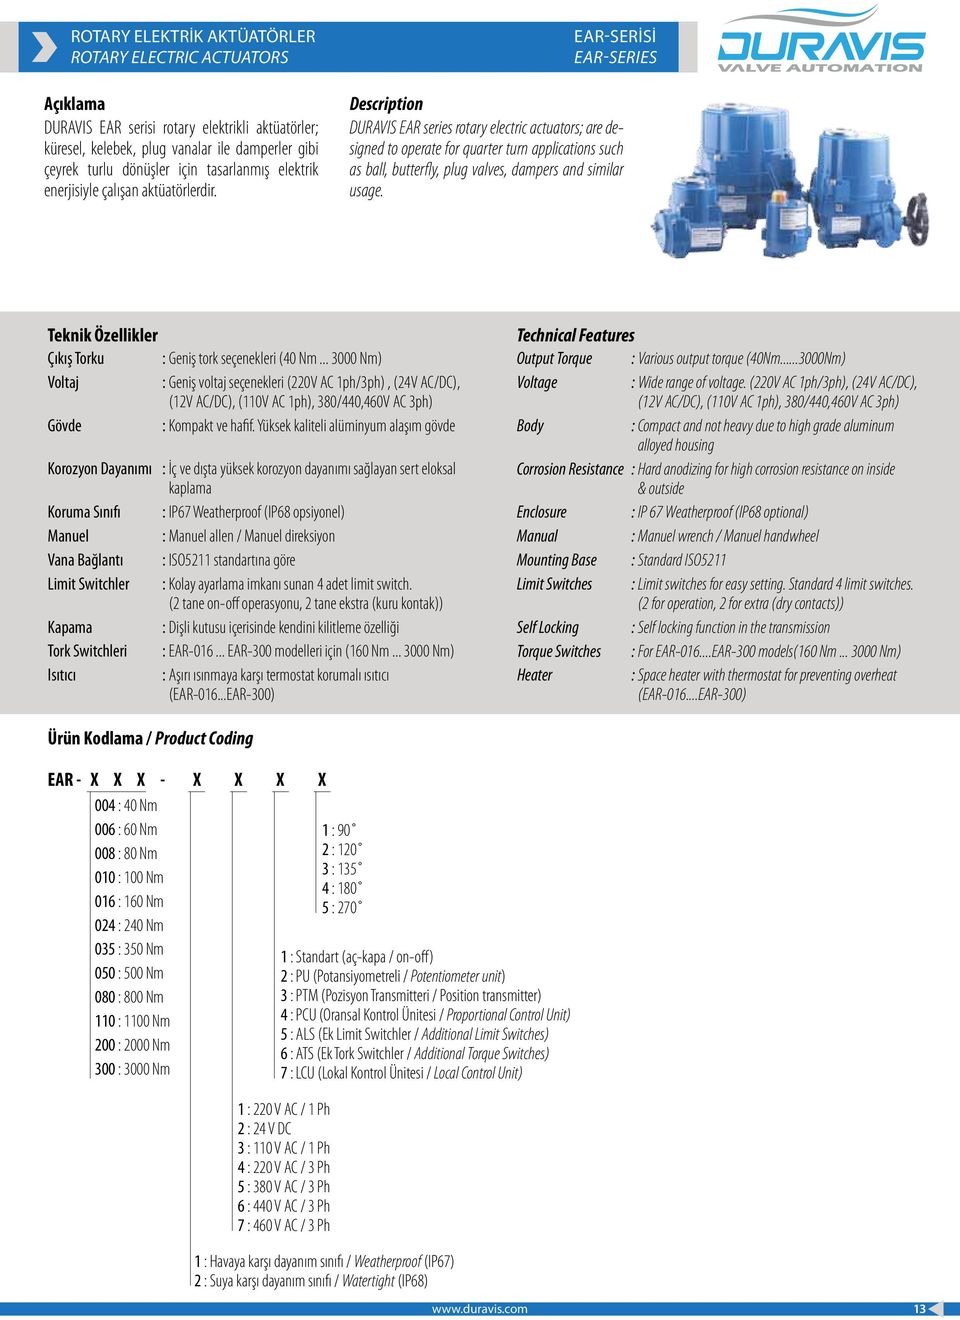 EAR-Serİsİ EAR-Series Description DURAVIS EAR series rotary electric actuators; are designed to operate for quarter turn applications such as ball, butterfly, plug valves, dampers and similar usage.